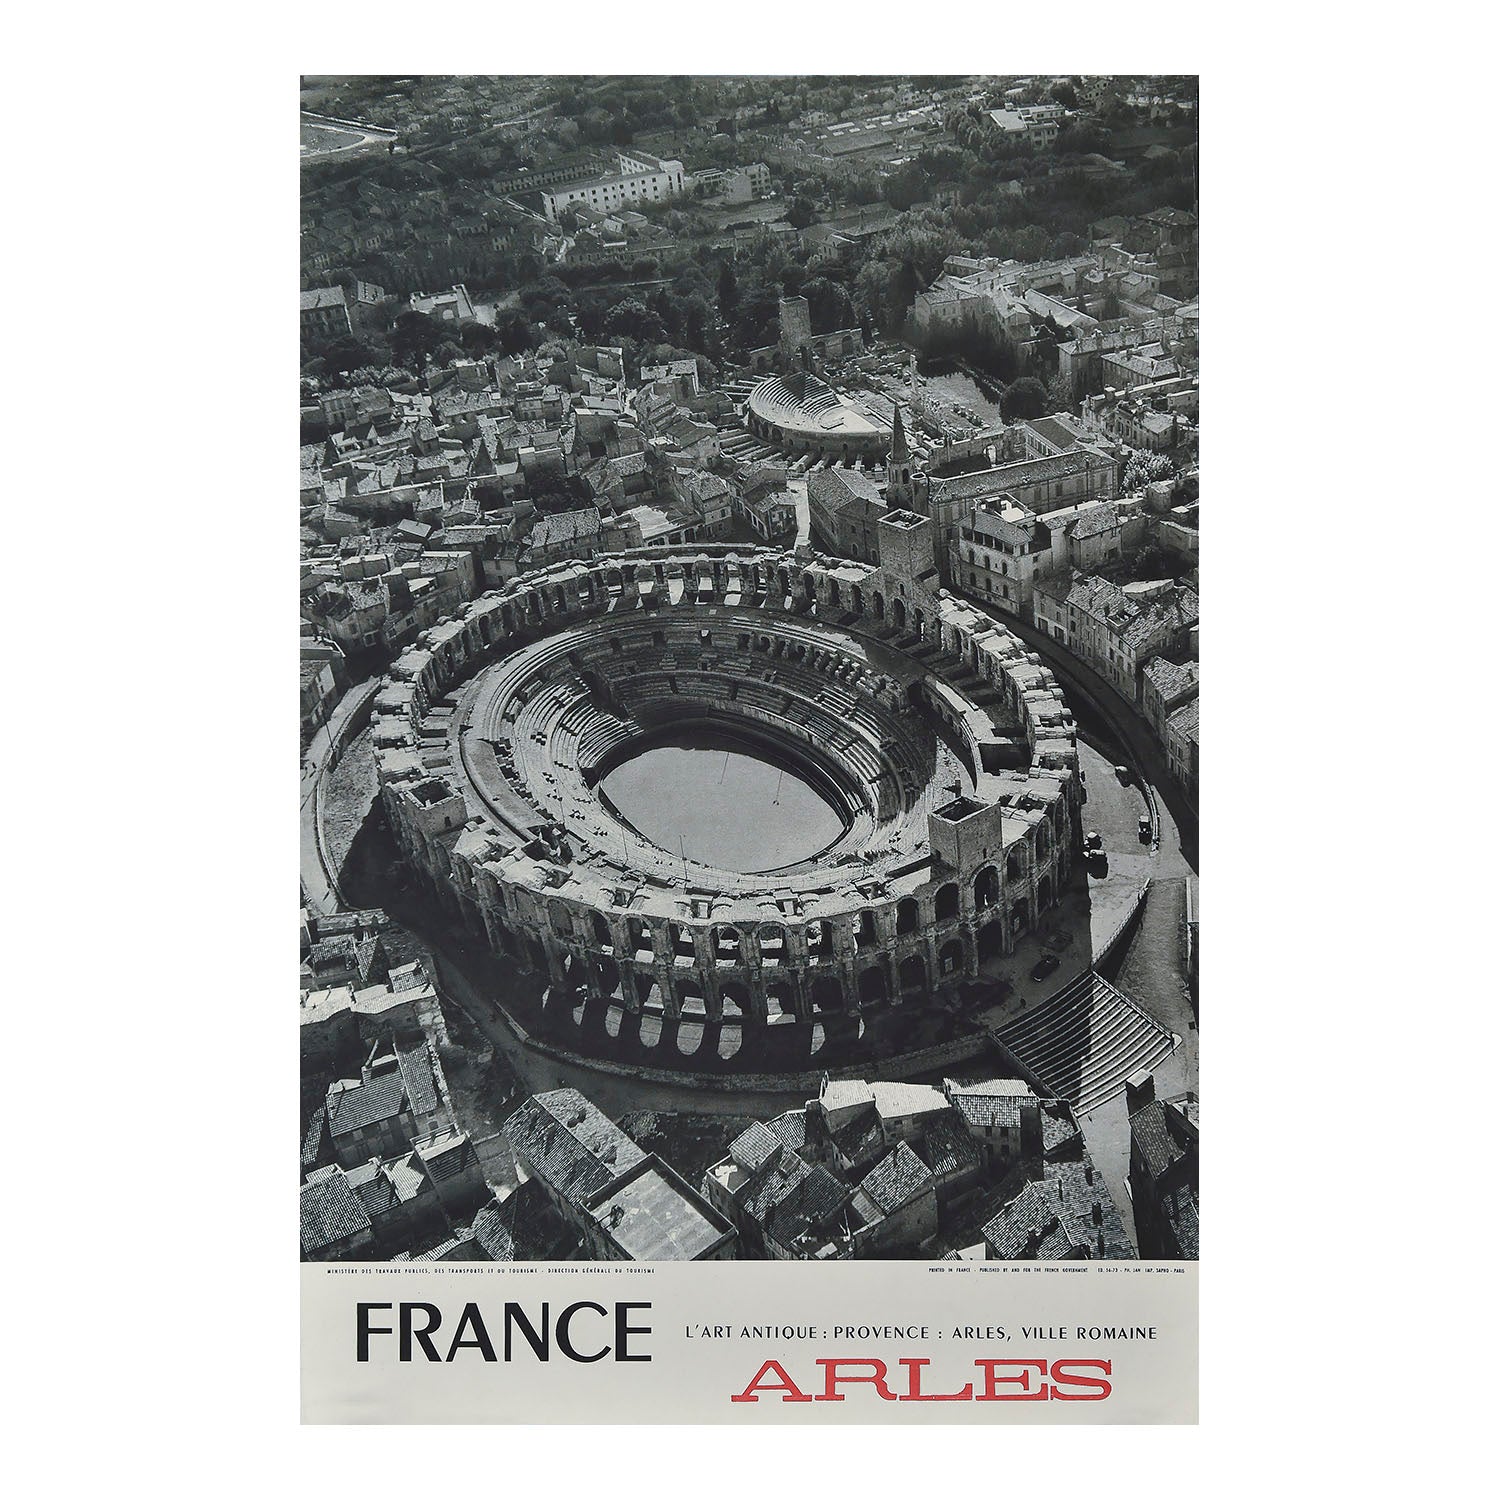 original French travel poster for the city of Arles in the Provence-Alpes-Côte d'Azur region, c. 1965. The photographic design features the city’s famous Roman amphitheatre and theatre.